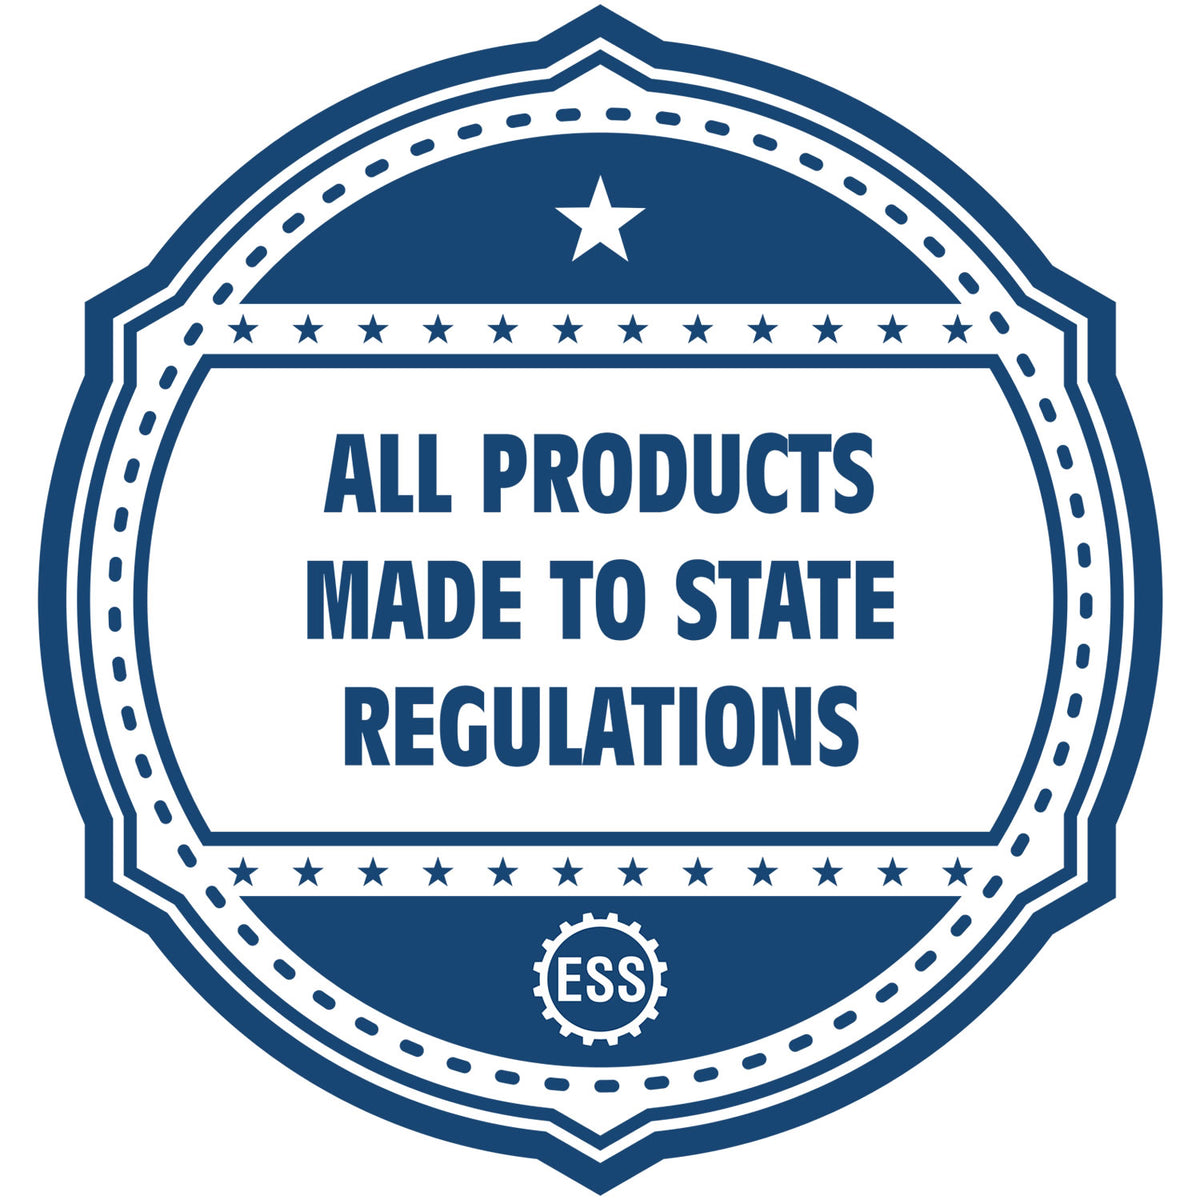 An icon or badge element for the Slim Pre-Inked District of Columbia Landscape Architect Seal Stamp showing that this product is made in compliance with state regulations.